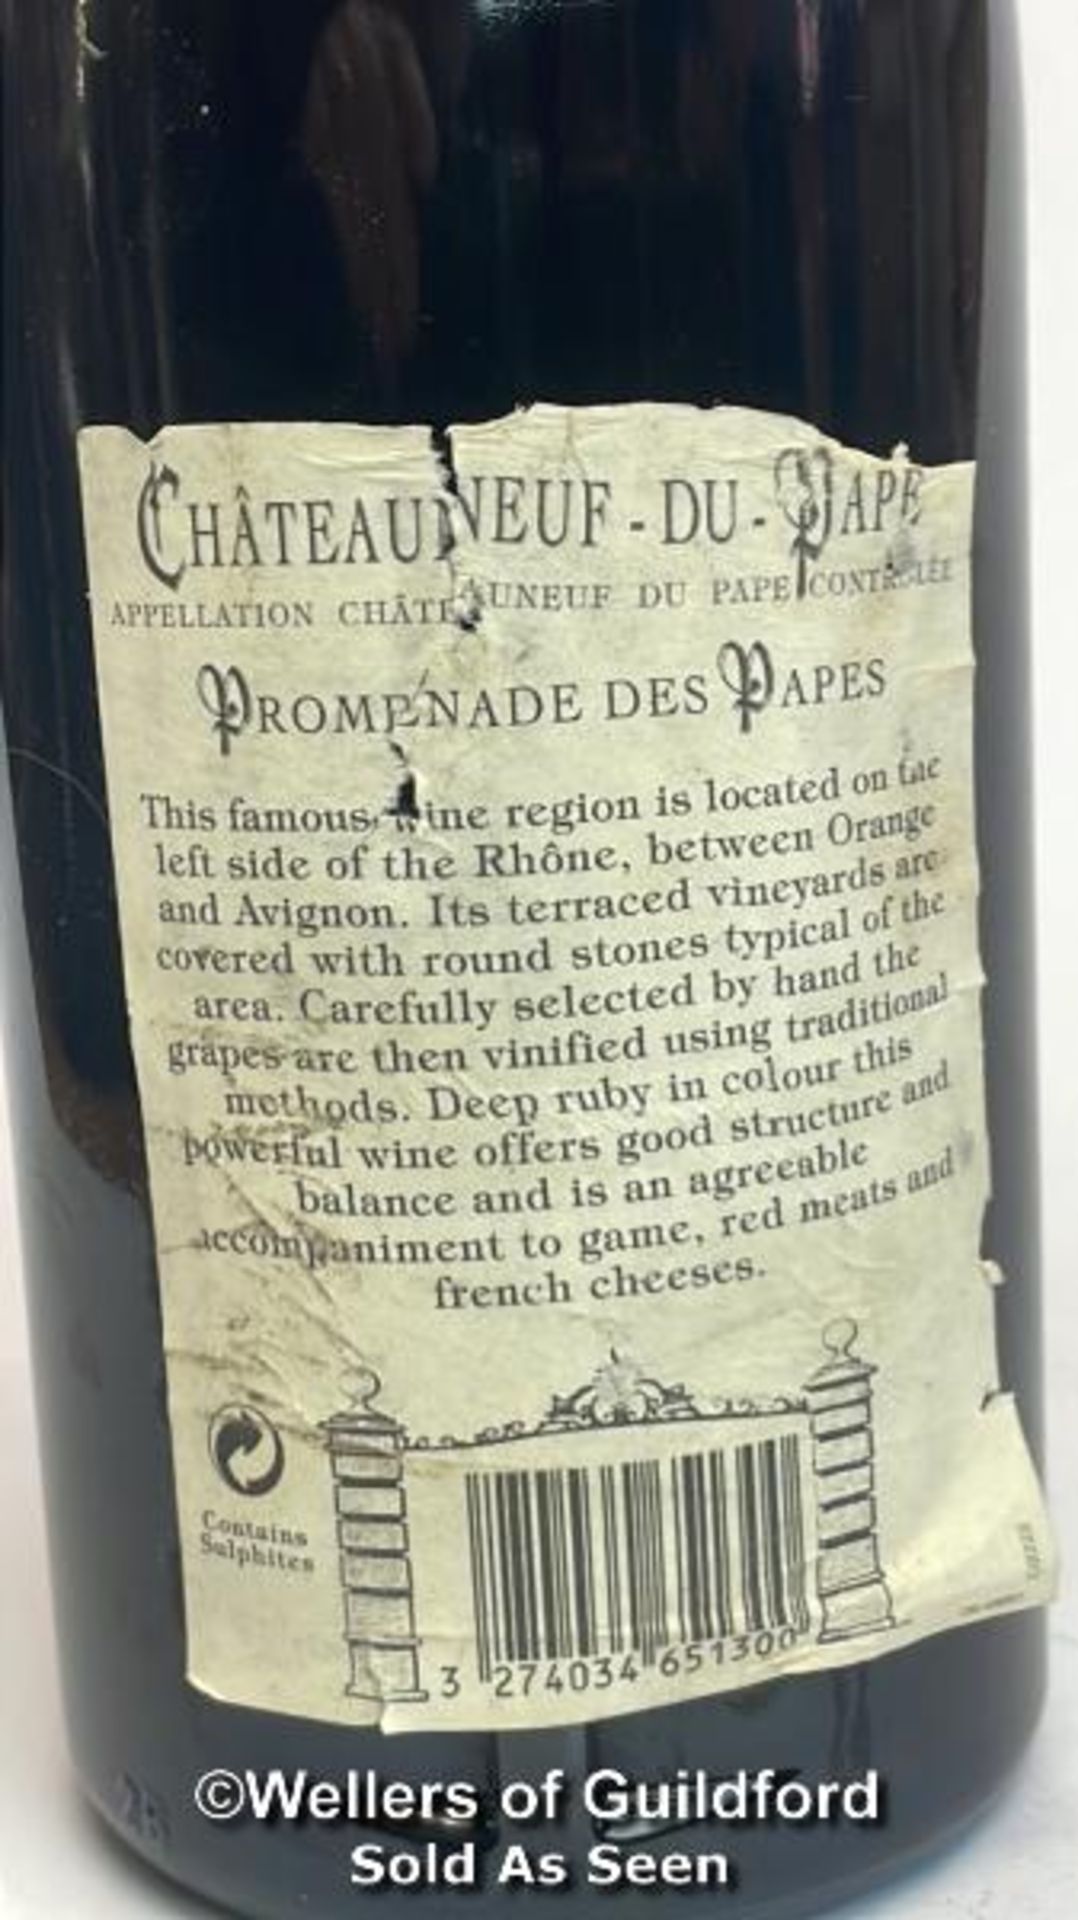 2005 Promenades Des Papes, Chateauneuf-Du-Pape, 75cl , 14% vol / Please see images for fill level - Image 3 of 4